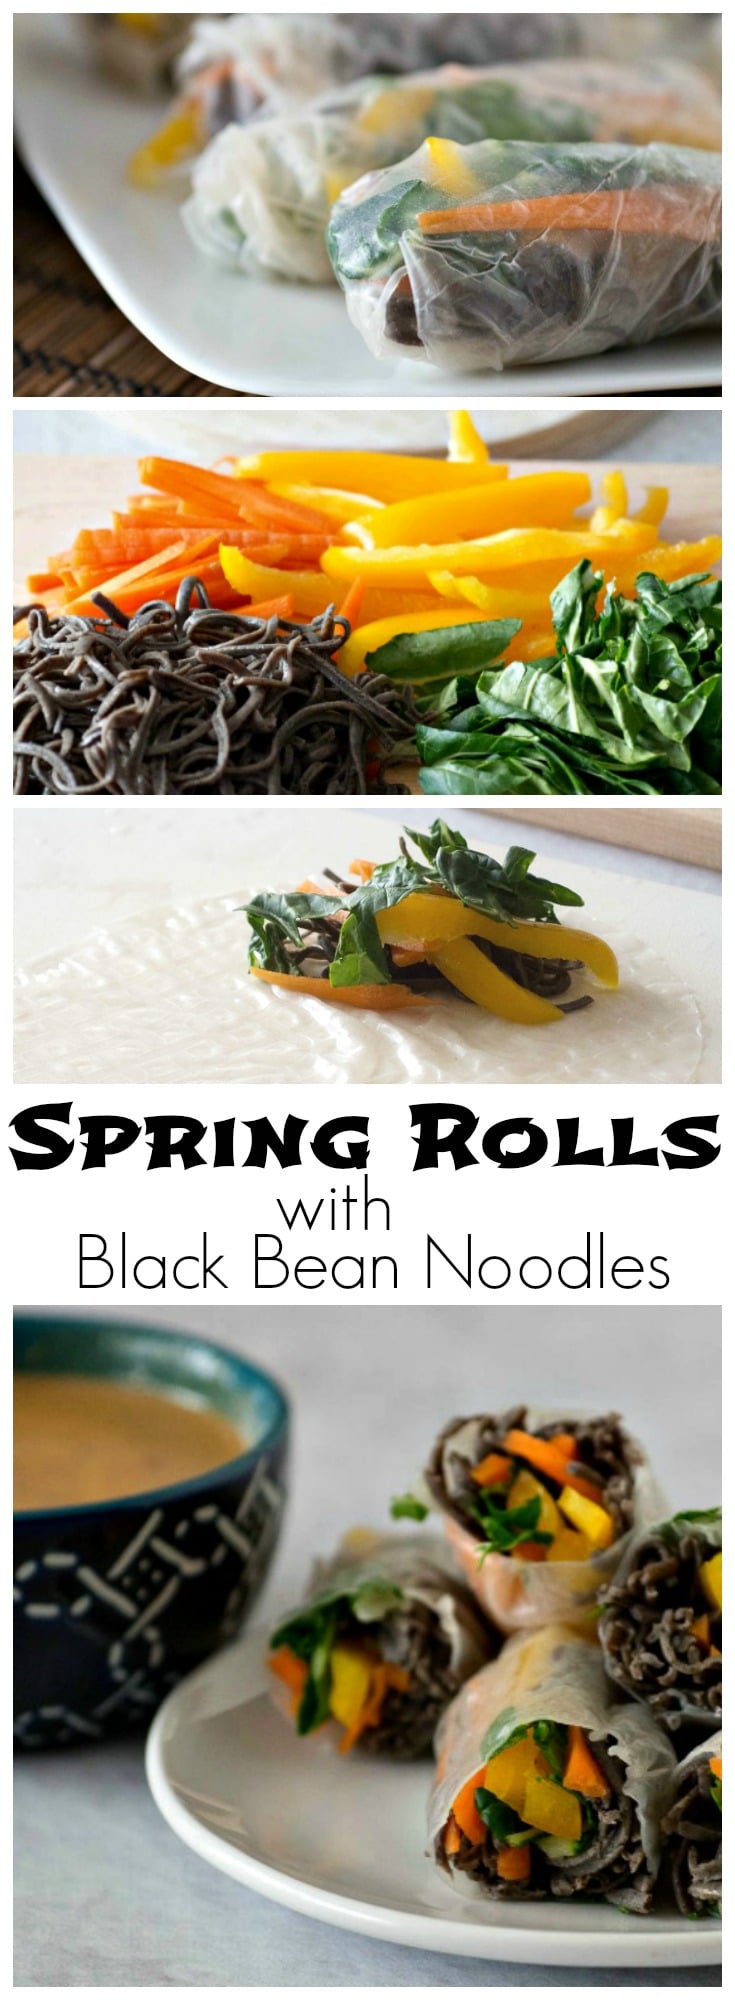 These easy to make Spring Rolls use Black Bean Spaghetti and lots of fresh veggies, like carrots, bok choi and yellow peppers, served with peanut dipping sauce.